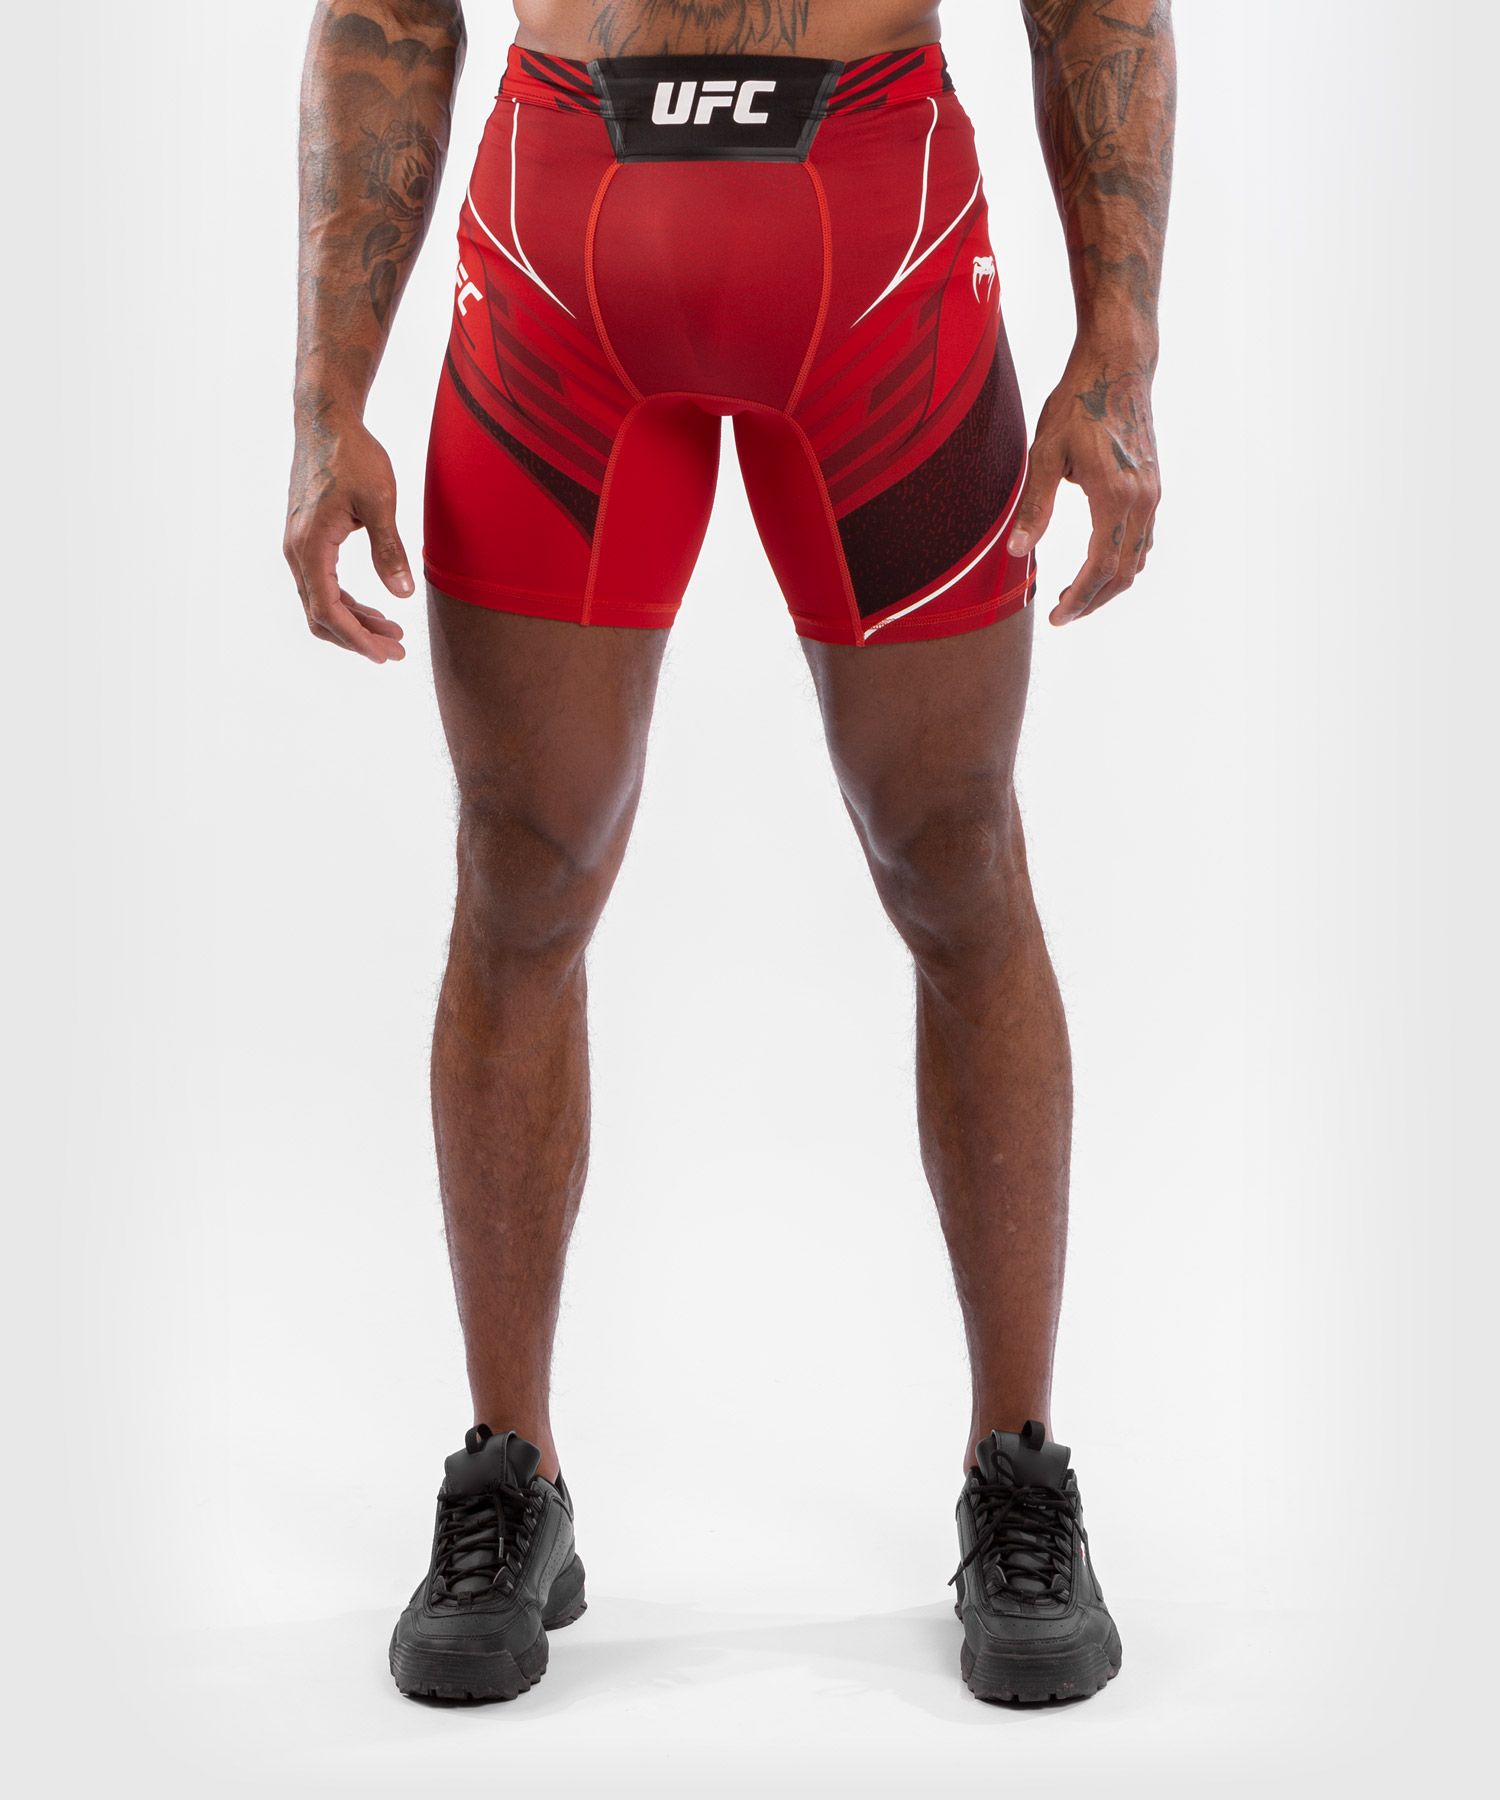 UFC Venum Authentic Fight Night Vale Tudo Herenshort - Long Fit - Rood